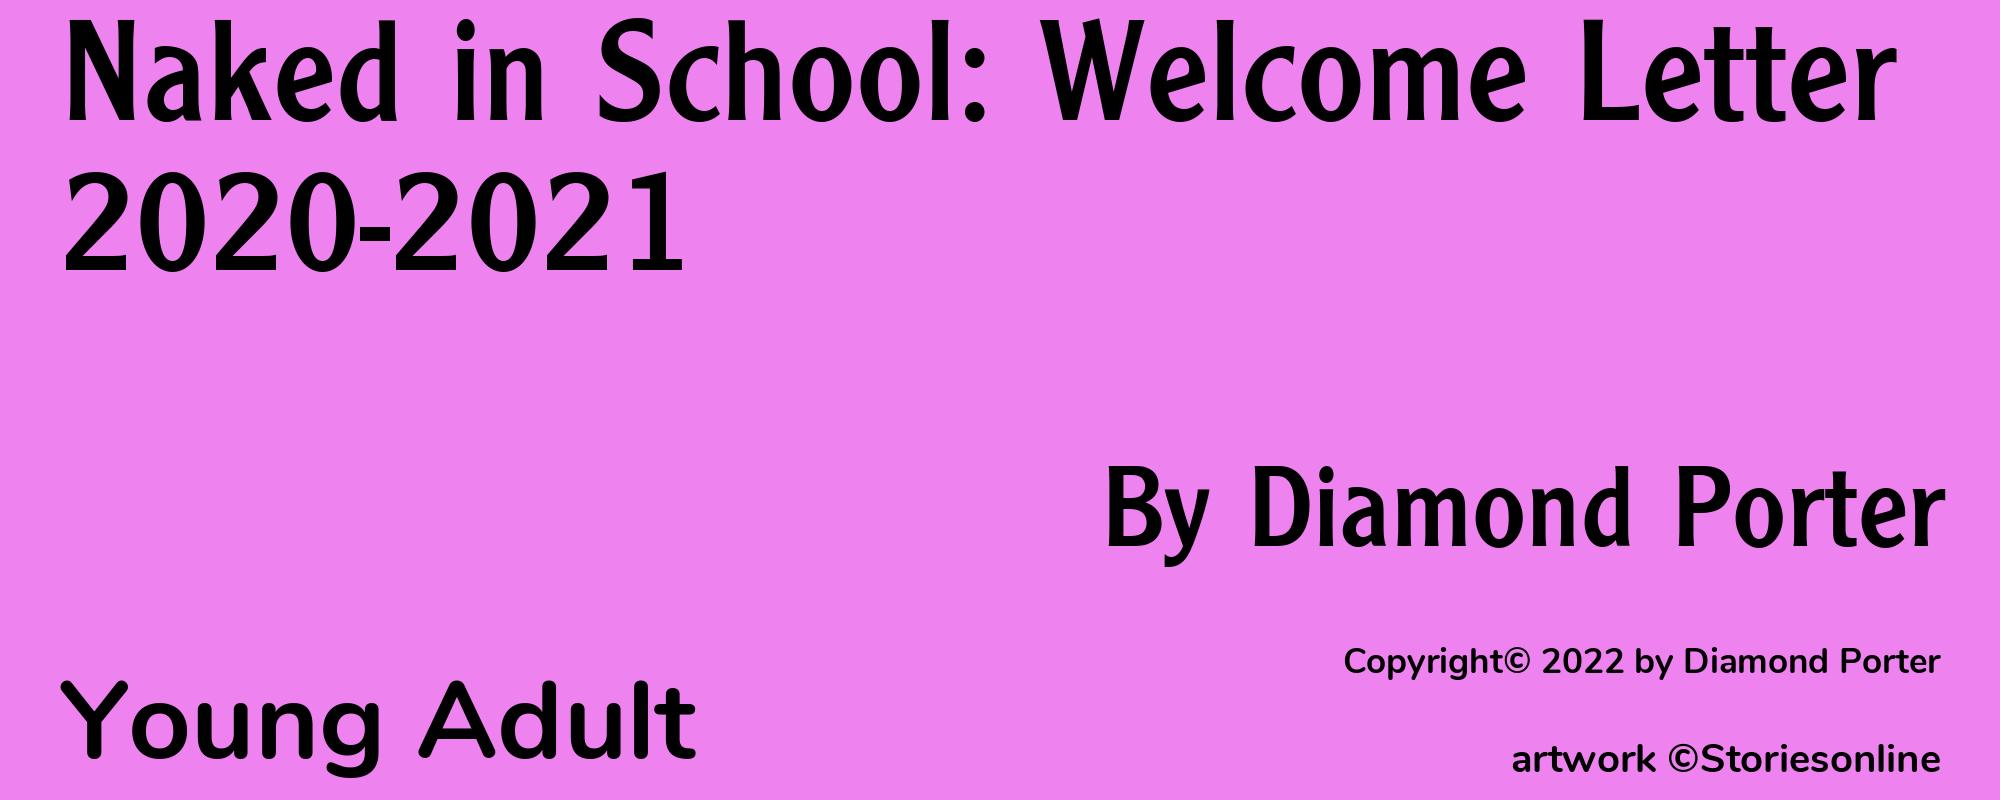 Naked in School: Welcome Letter 2020-2021 - Cover